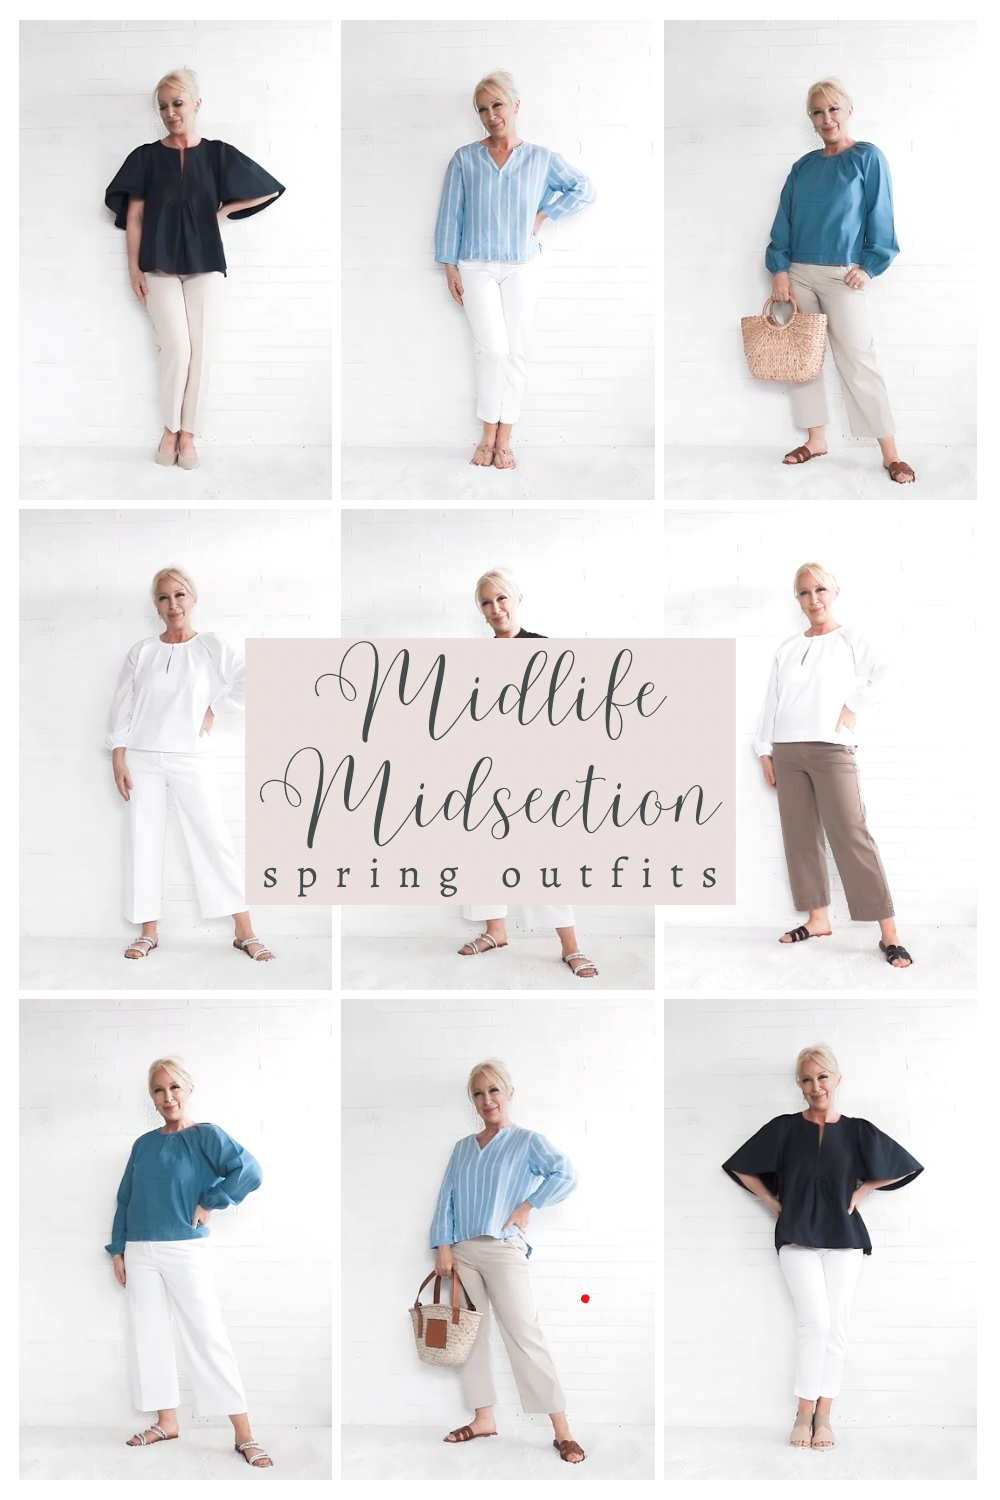 Spring Outfits for the Midlife Midsection III